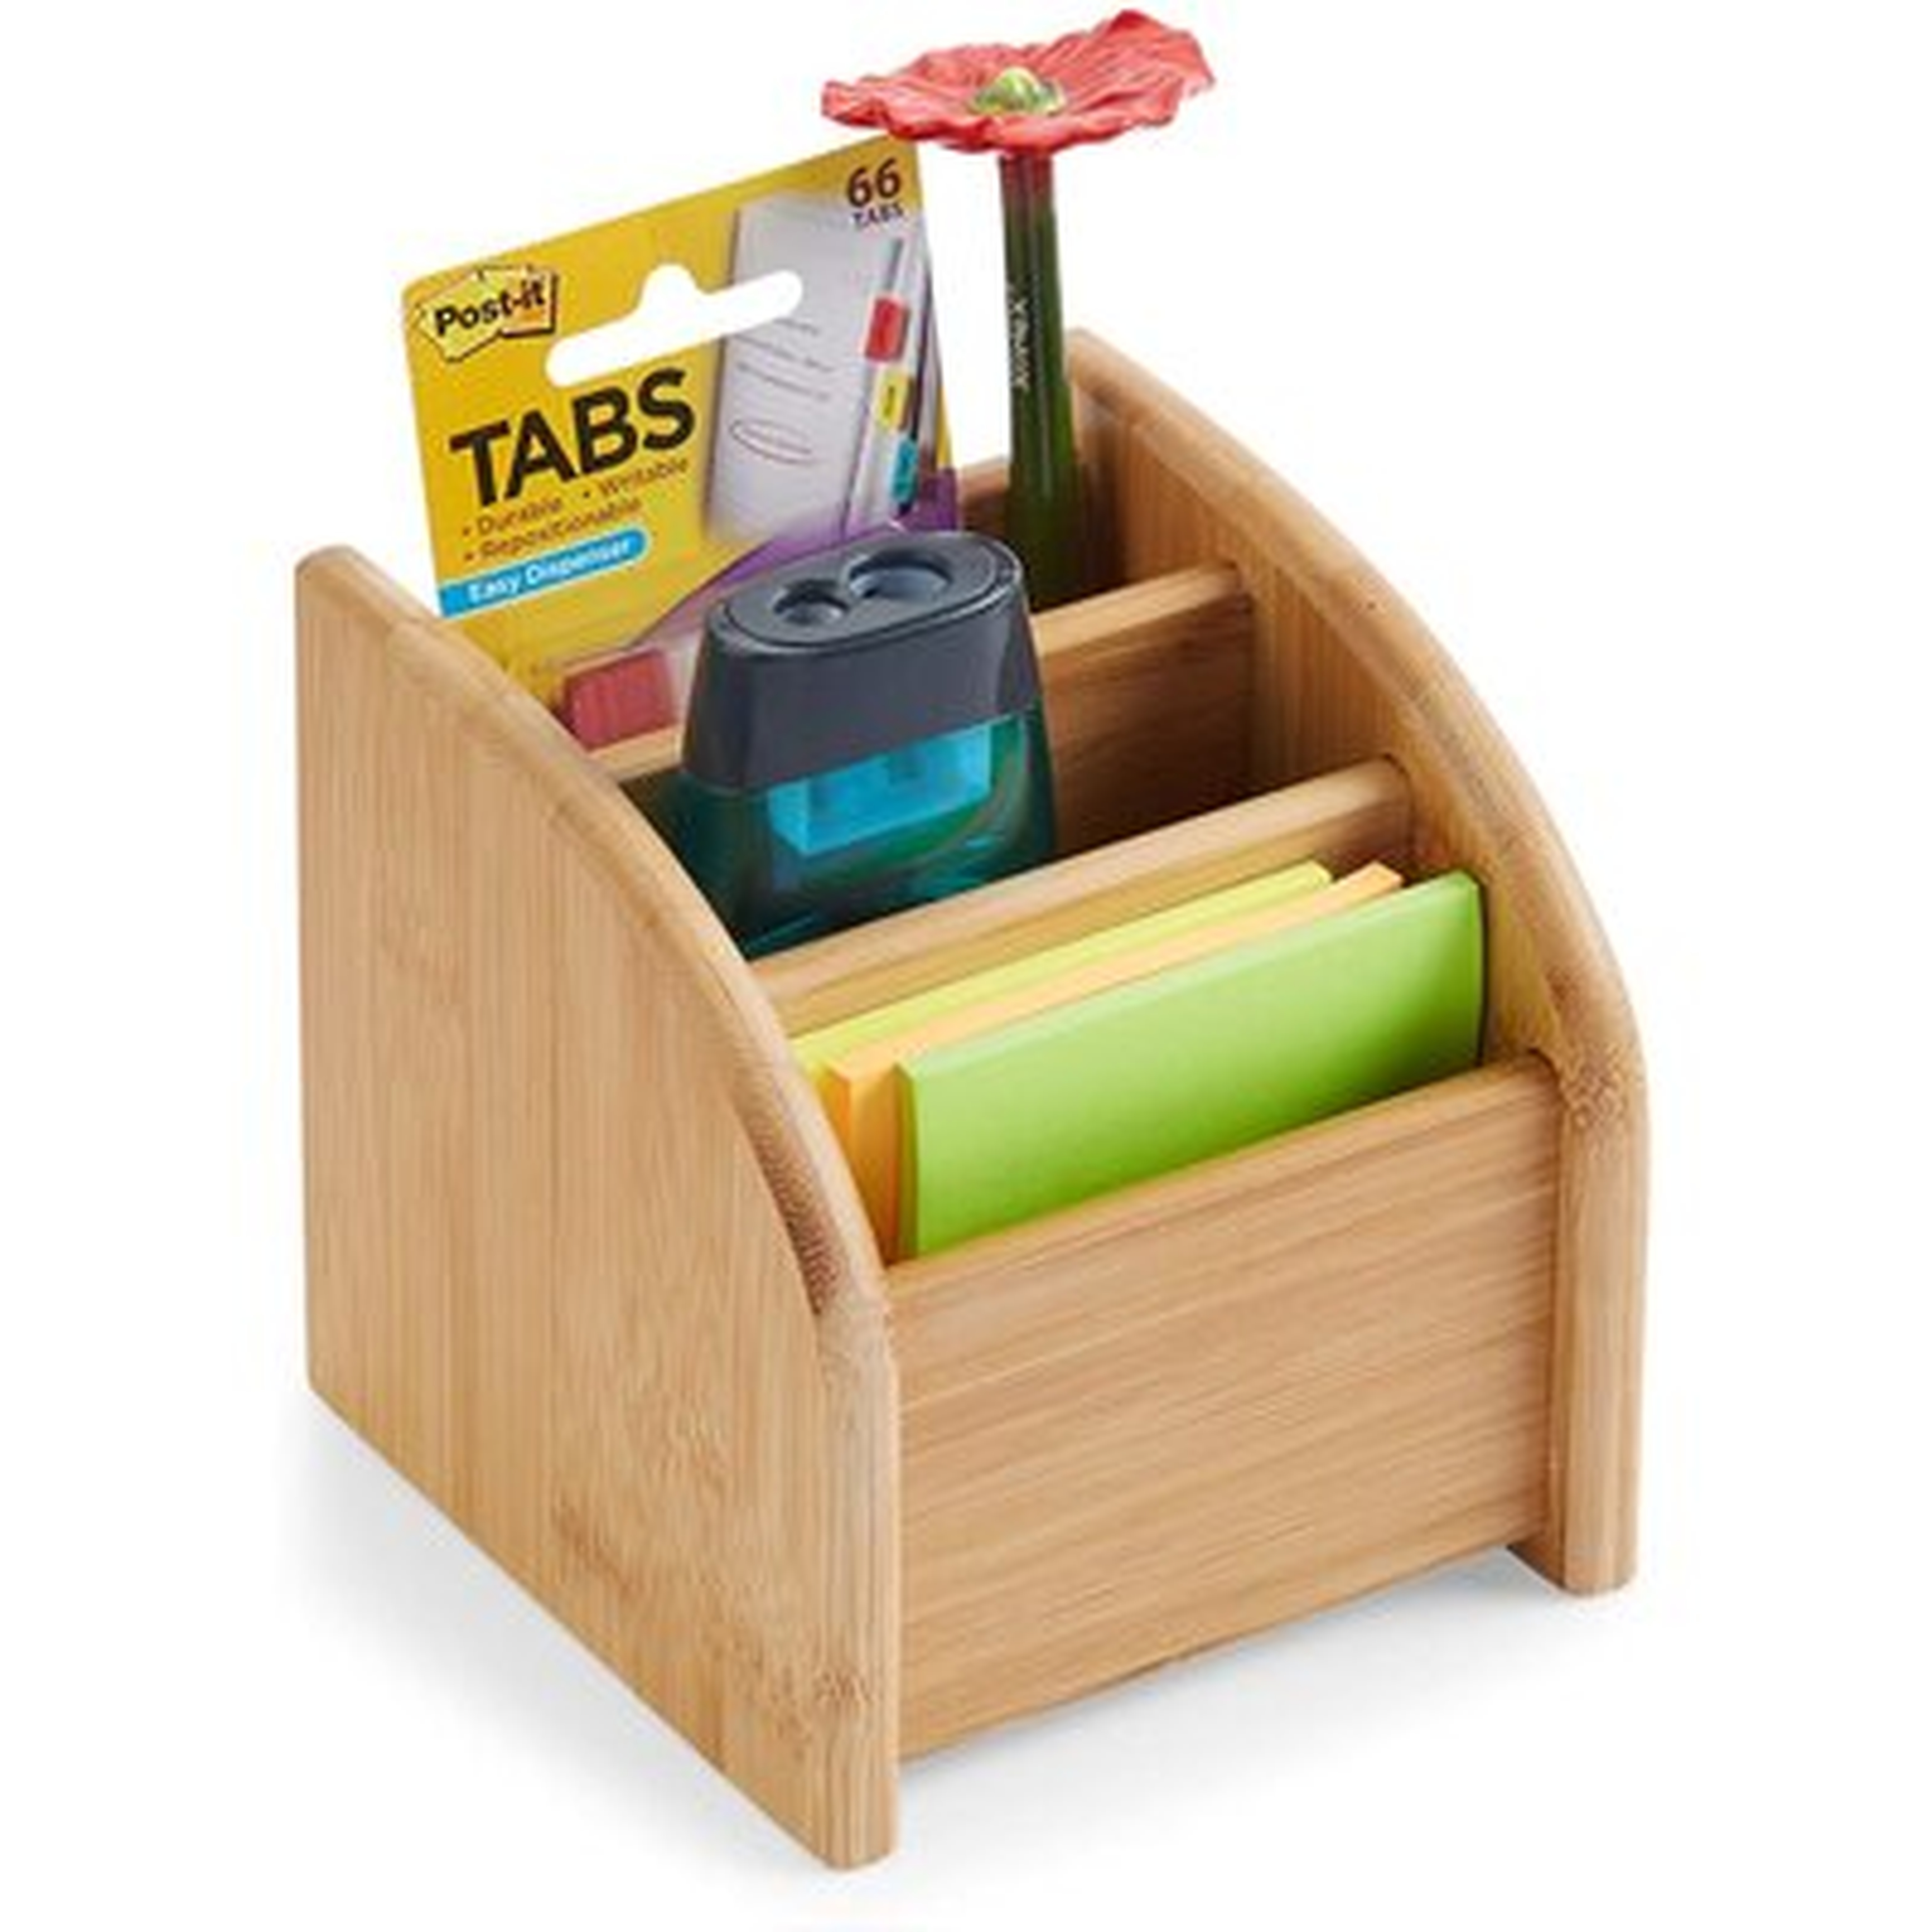 Desk Organizer 3 Tier Bamboo Mini Desk Storage For Office Supplies, Toiletries, Crafts, Great For Desk, Vanity, Tabletop In Home Or Office Makeup Organizer By: Inbox Zero - Wayfair